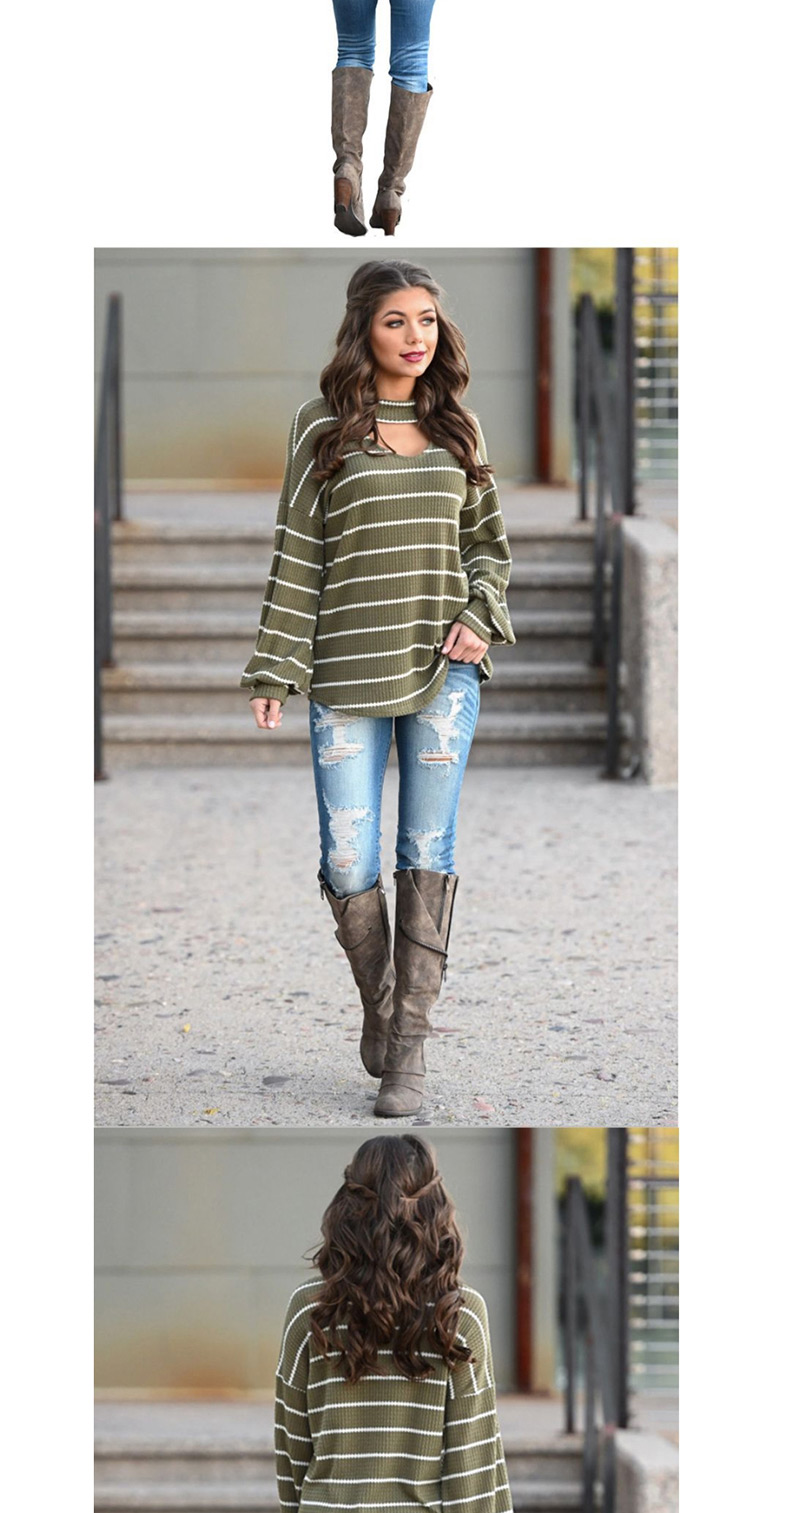 Fashion Army Green Striped Pullover Shirt,Sweater